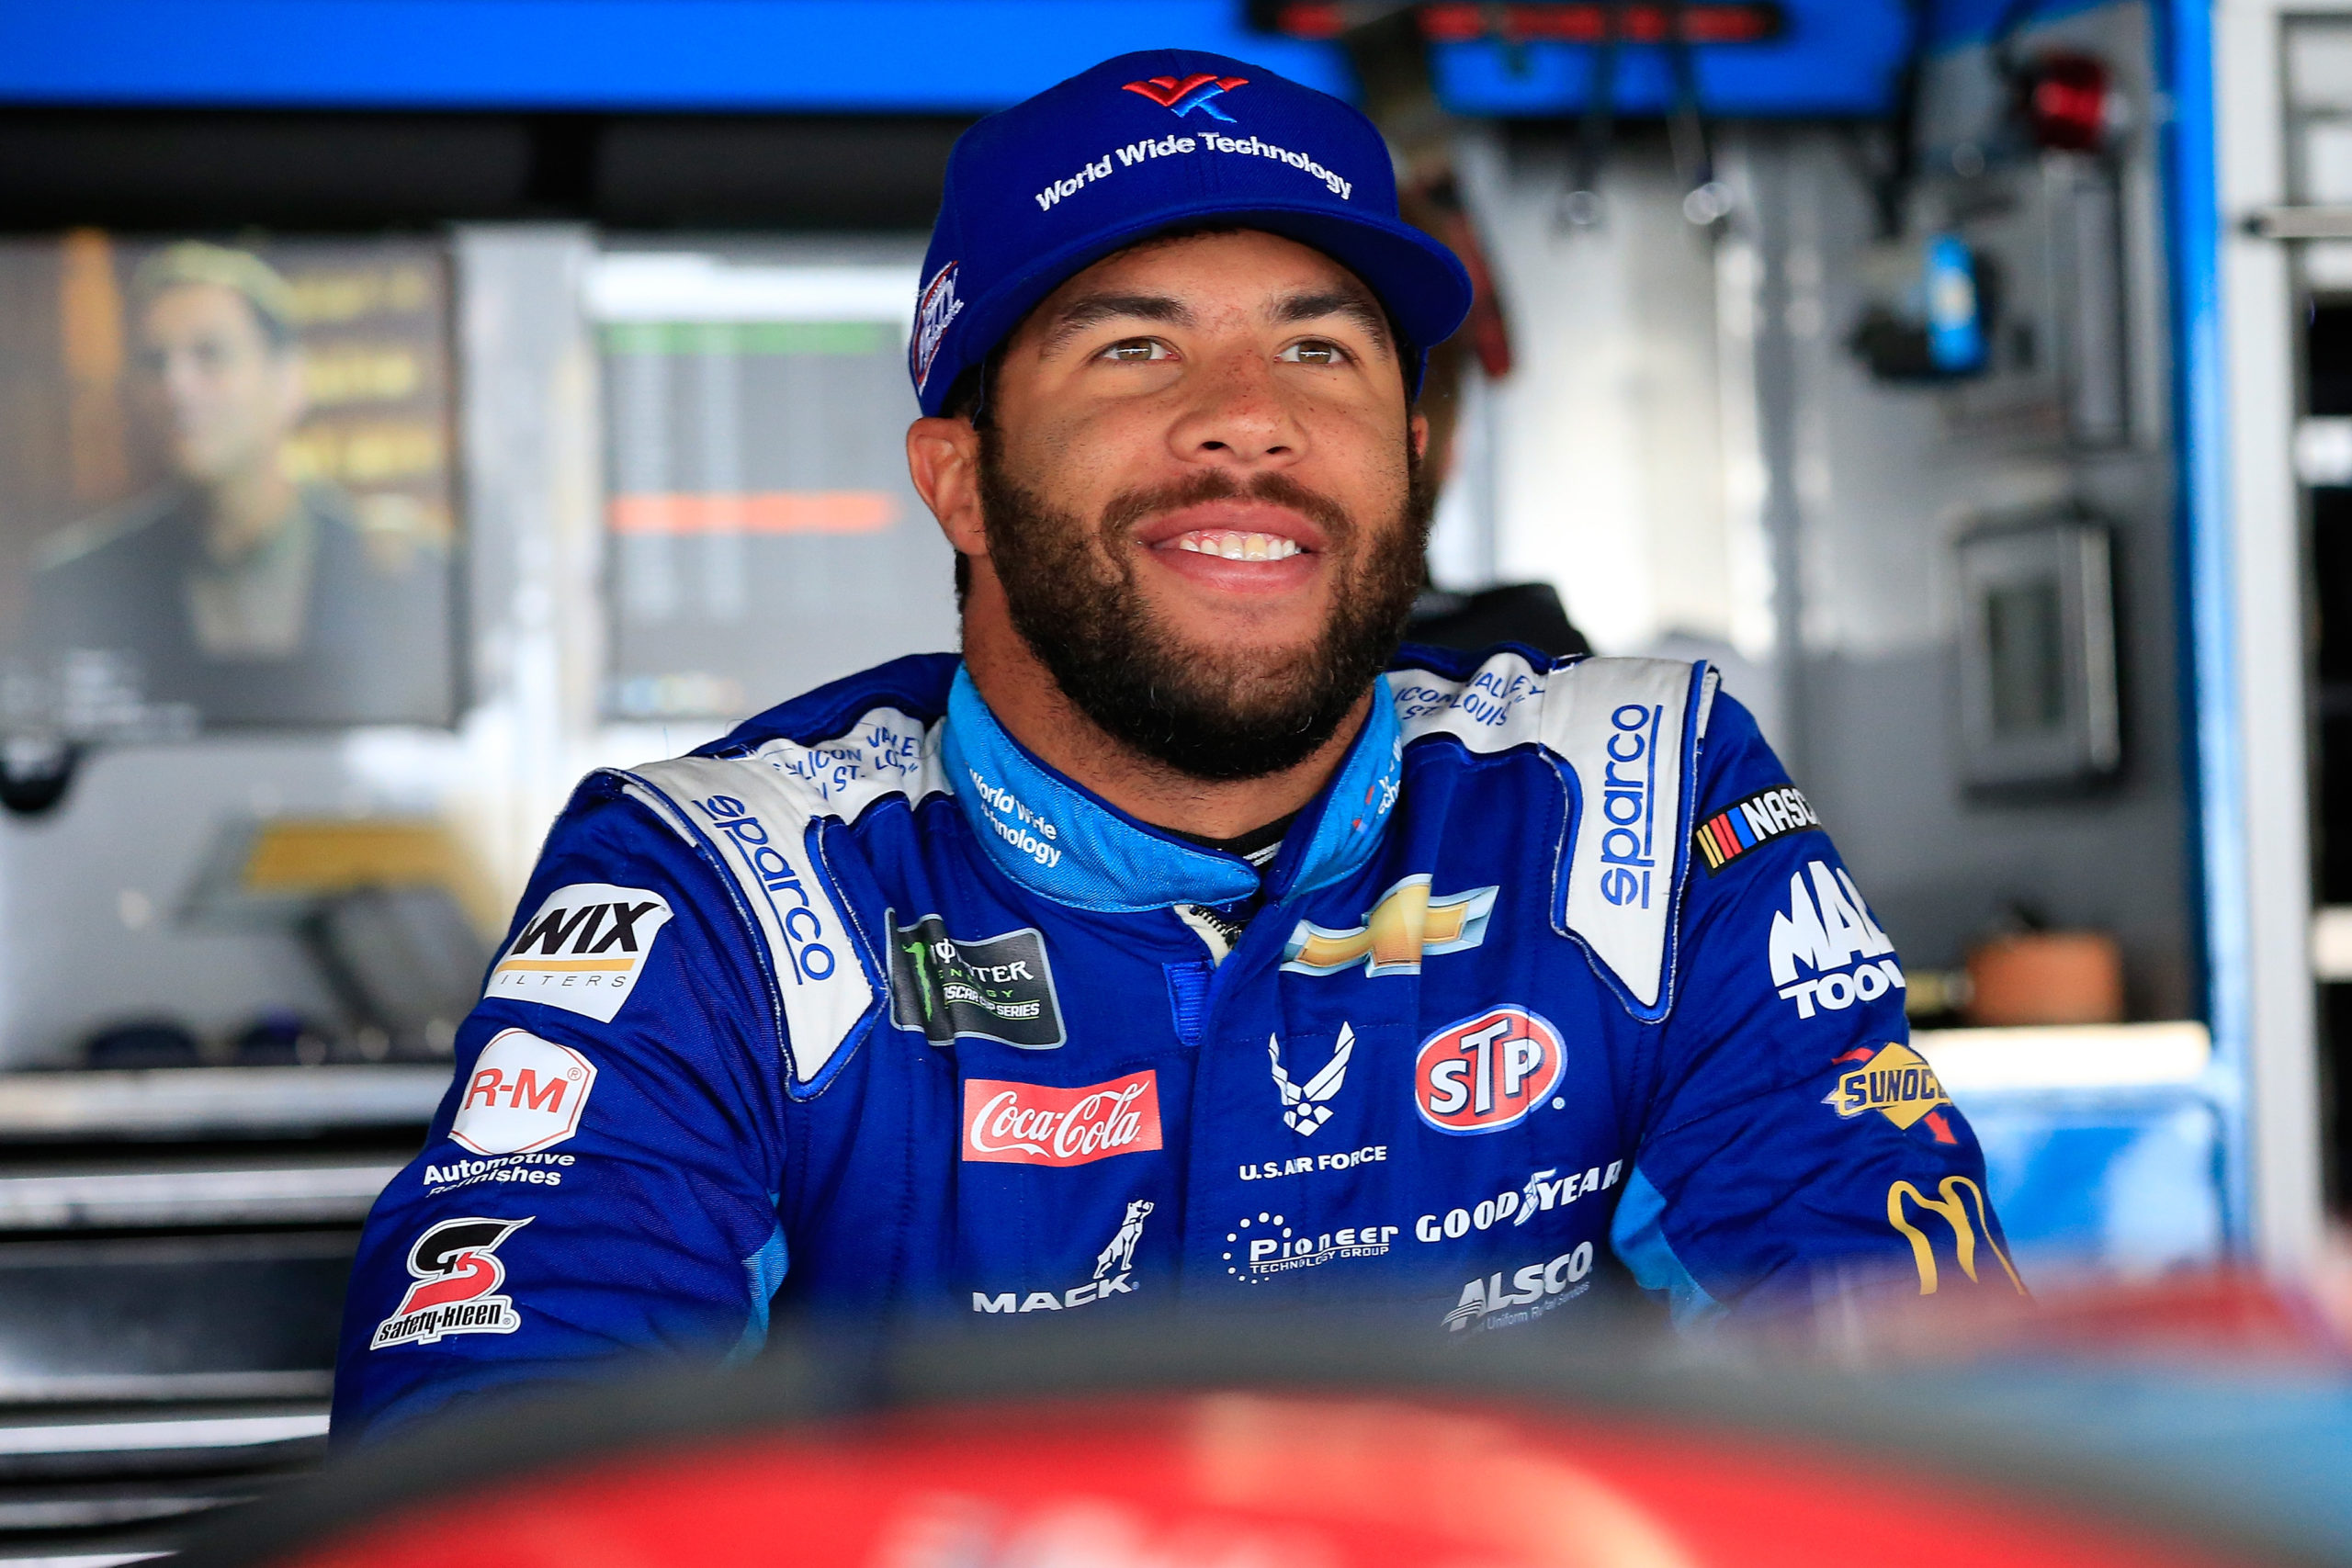 Beats By Dre Announces Endorsement Deal With Bubba Wallace After Trump's Hoax Tweet